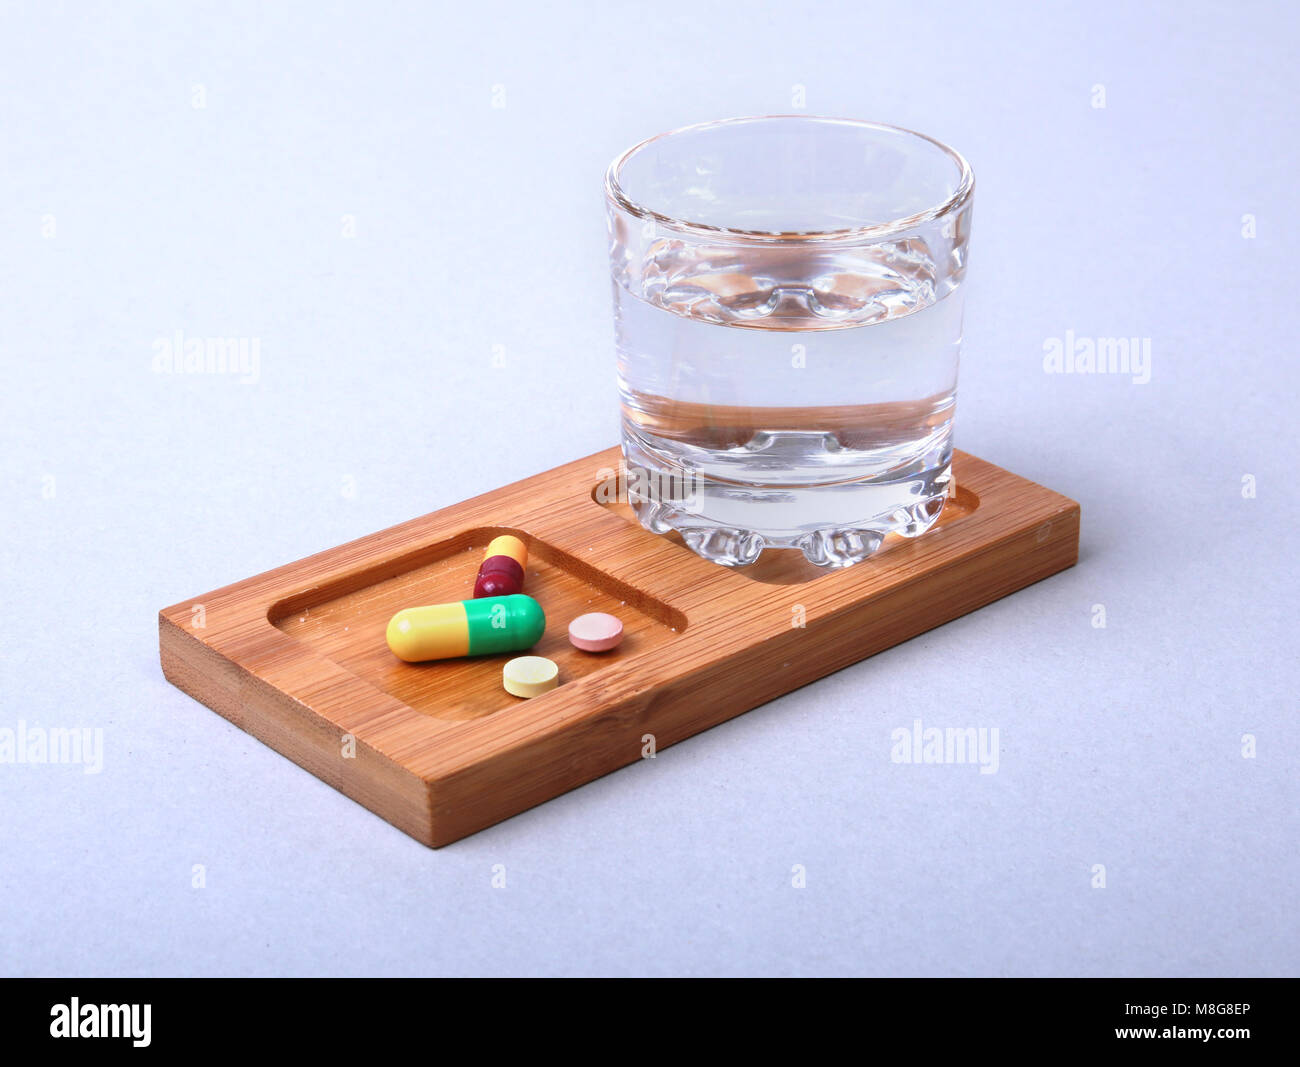 Glass of water and pills on white background Stock Photo